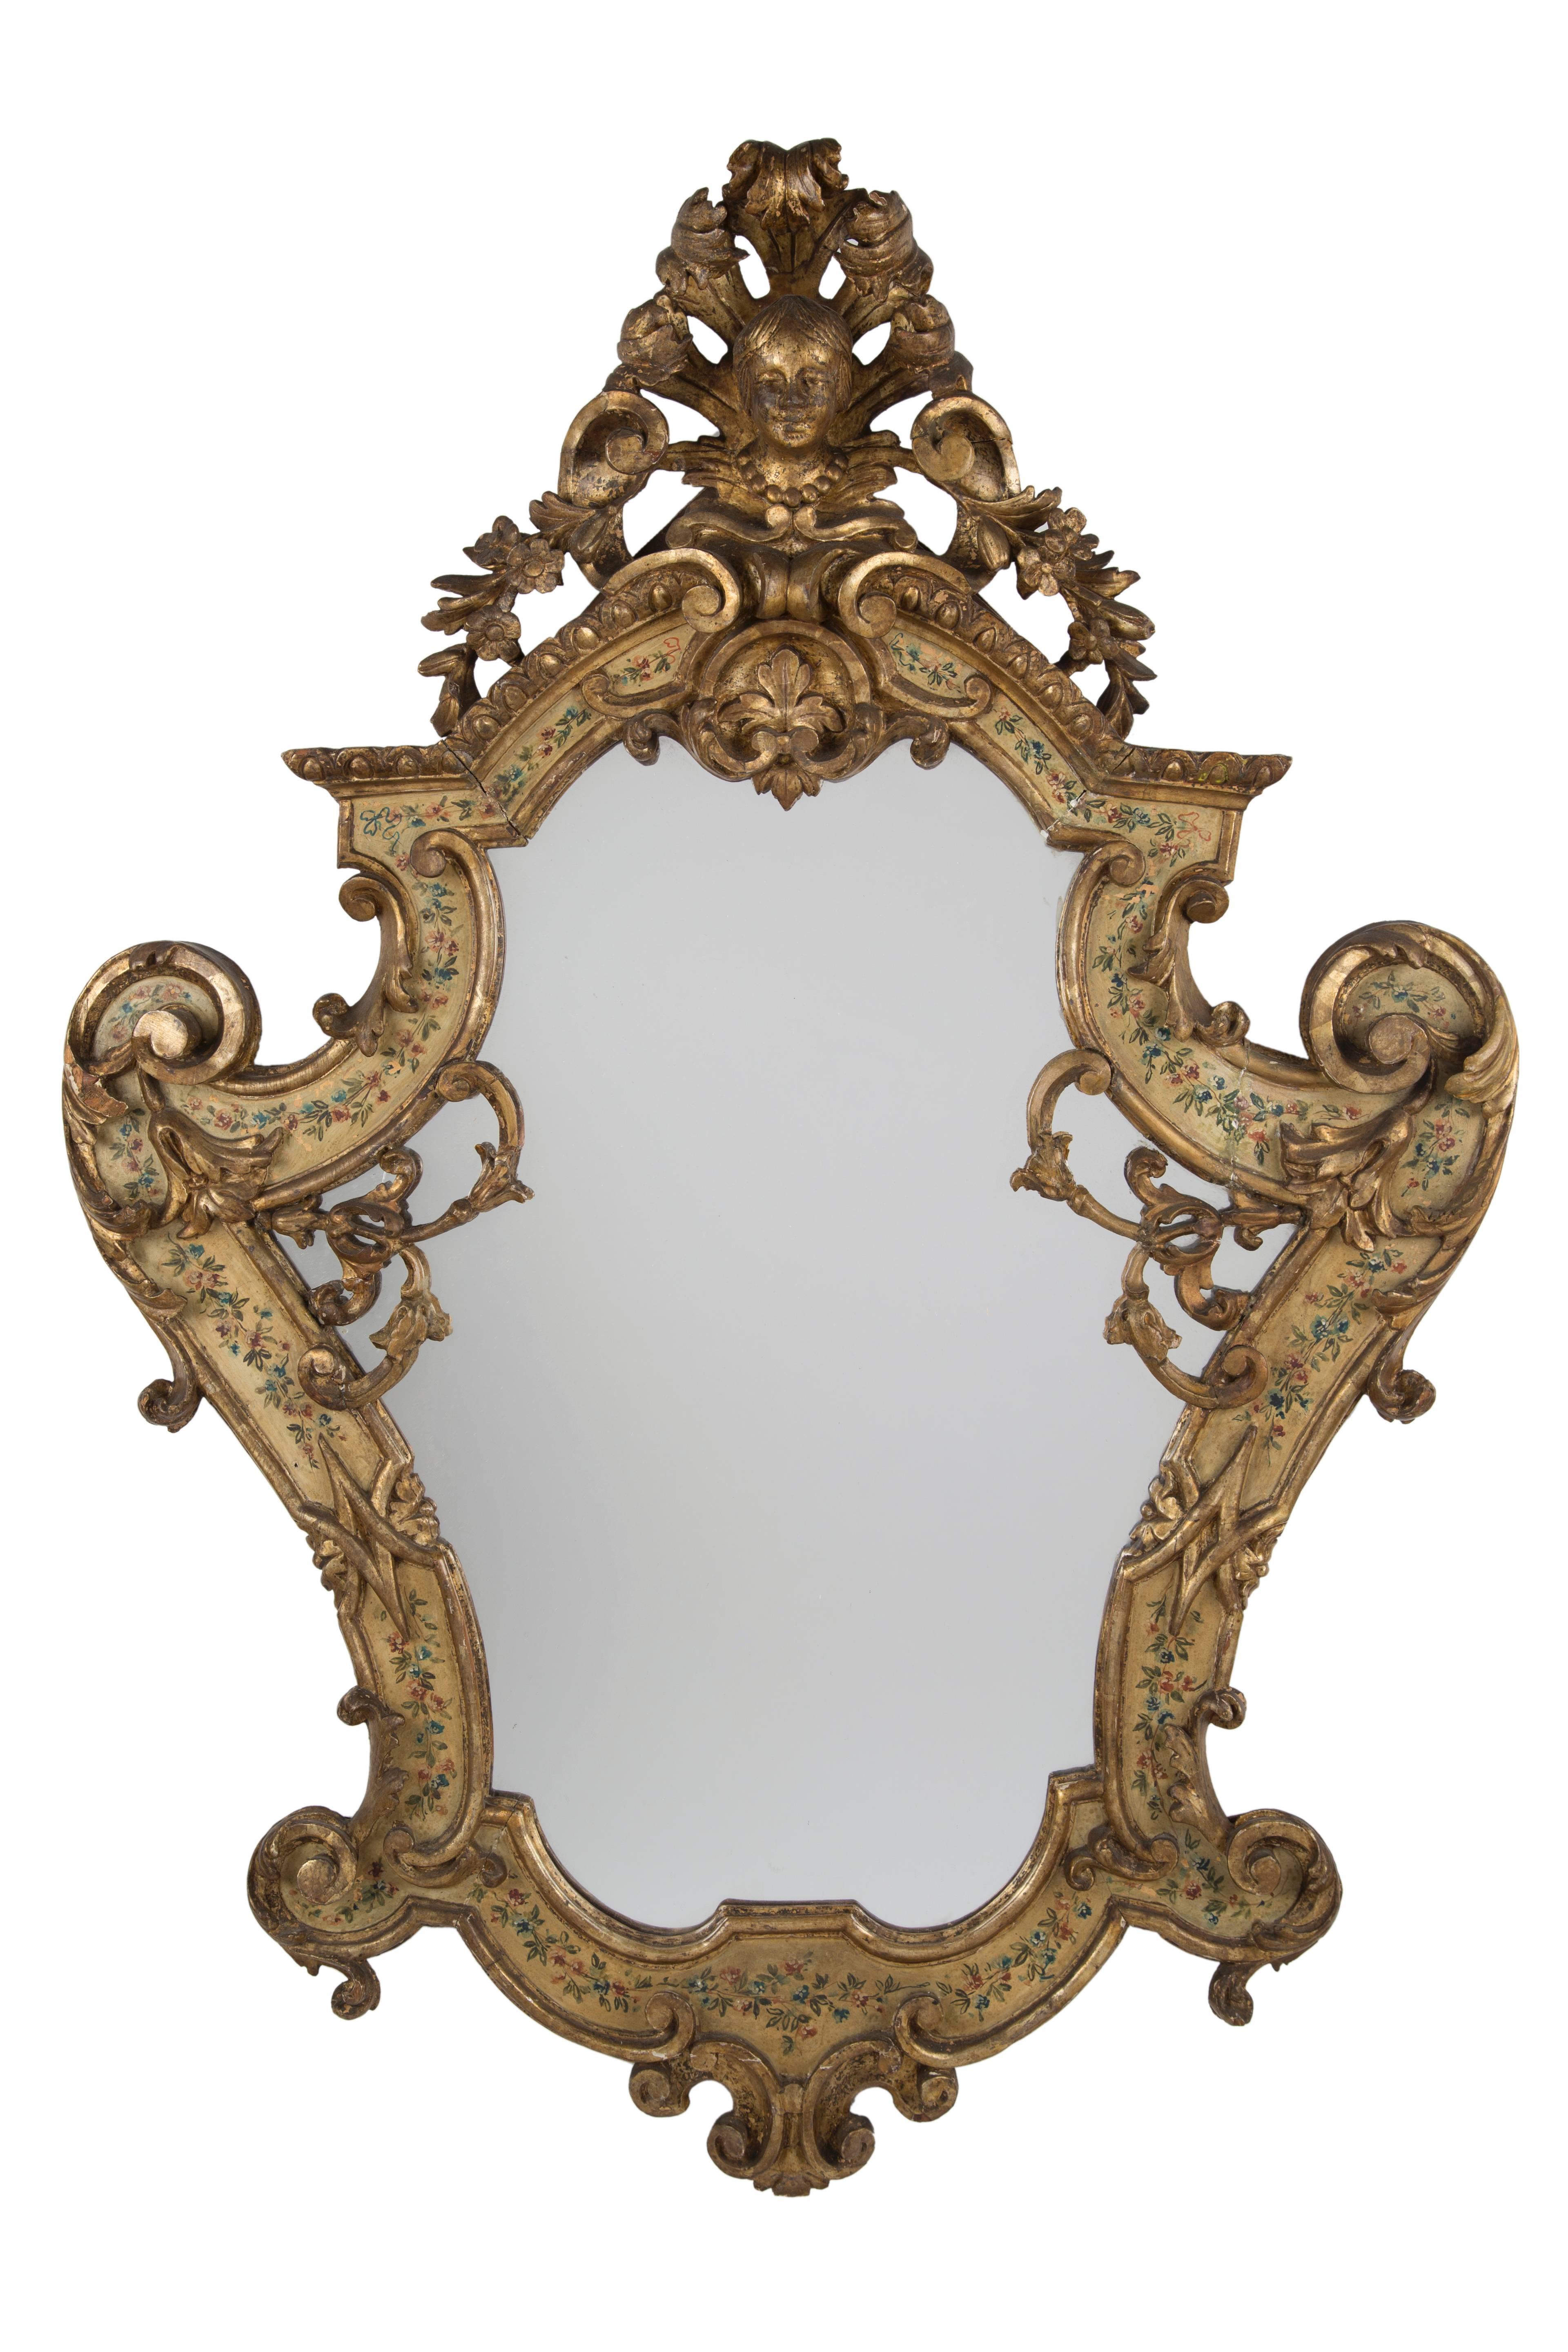 Pair of Louis XV carved giltwood polychrome mirrors with figural crown and ornate floral motif. First half, 18th century.
Height 38.5 in.